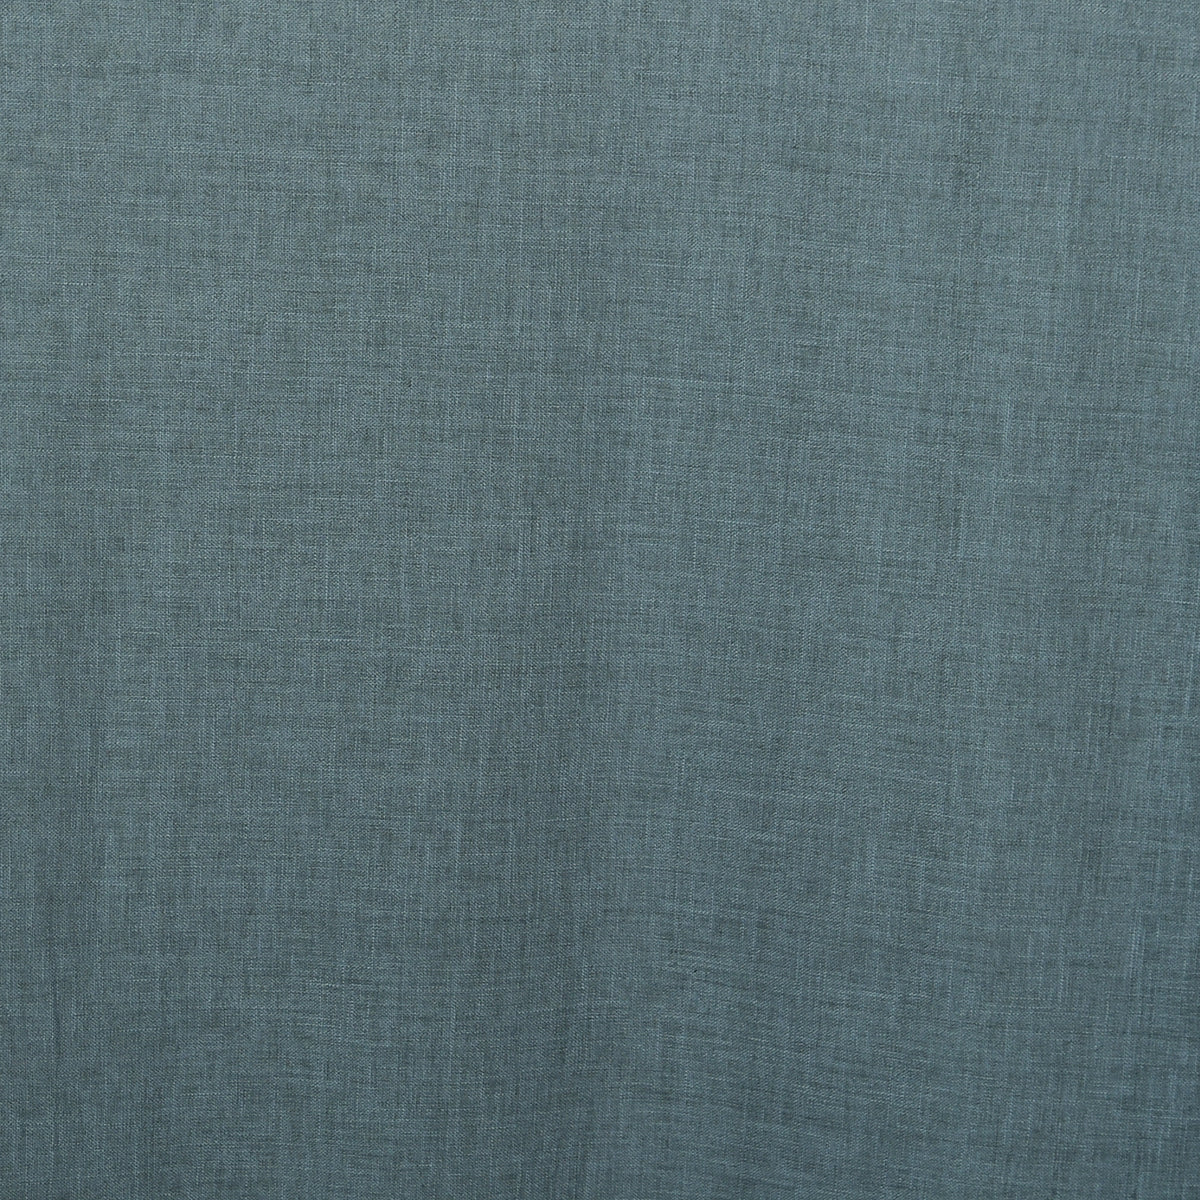 Day curtain gray turquoise Vliet